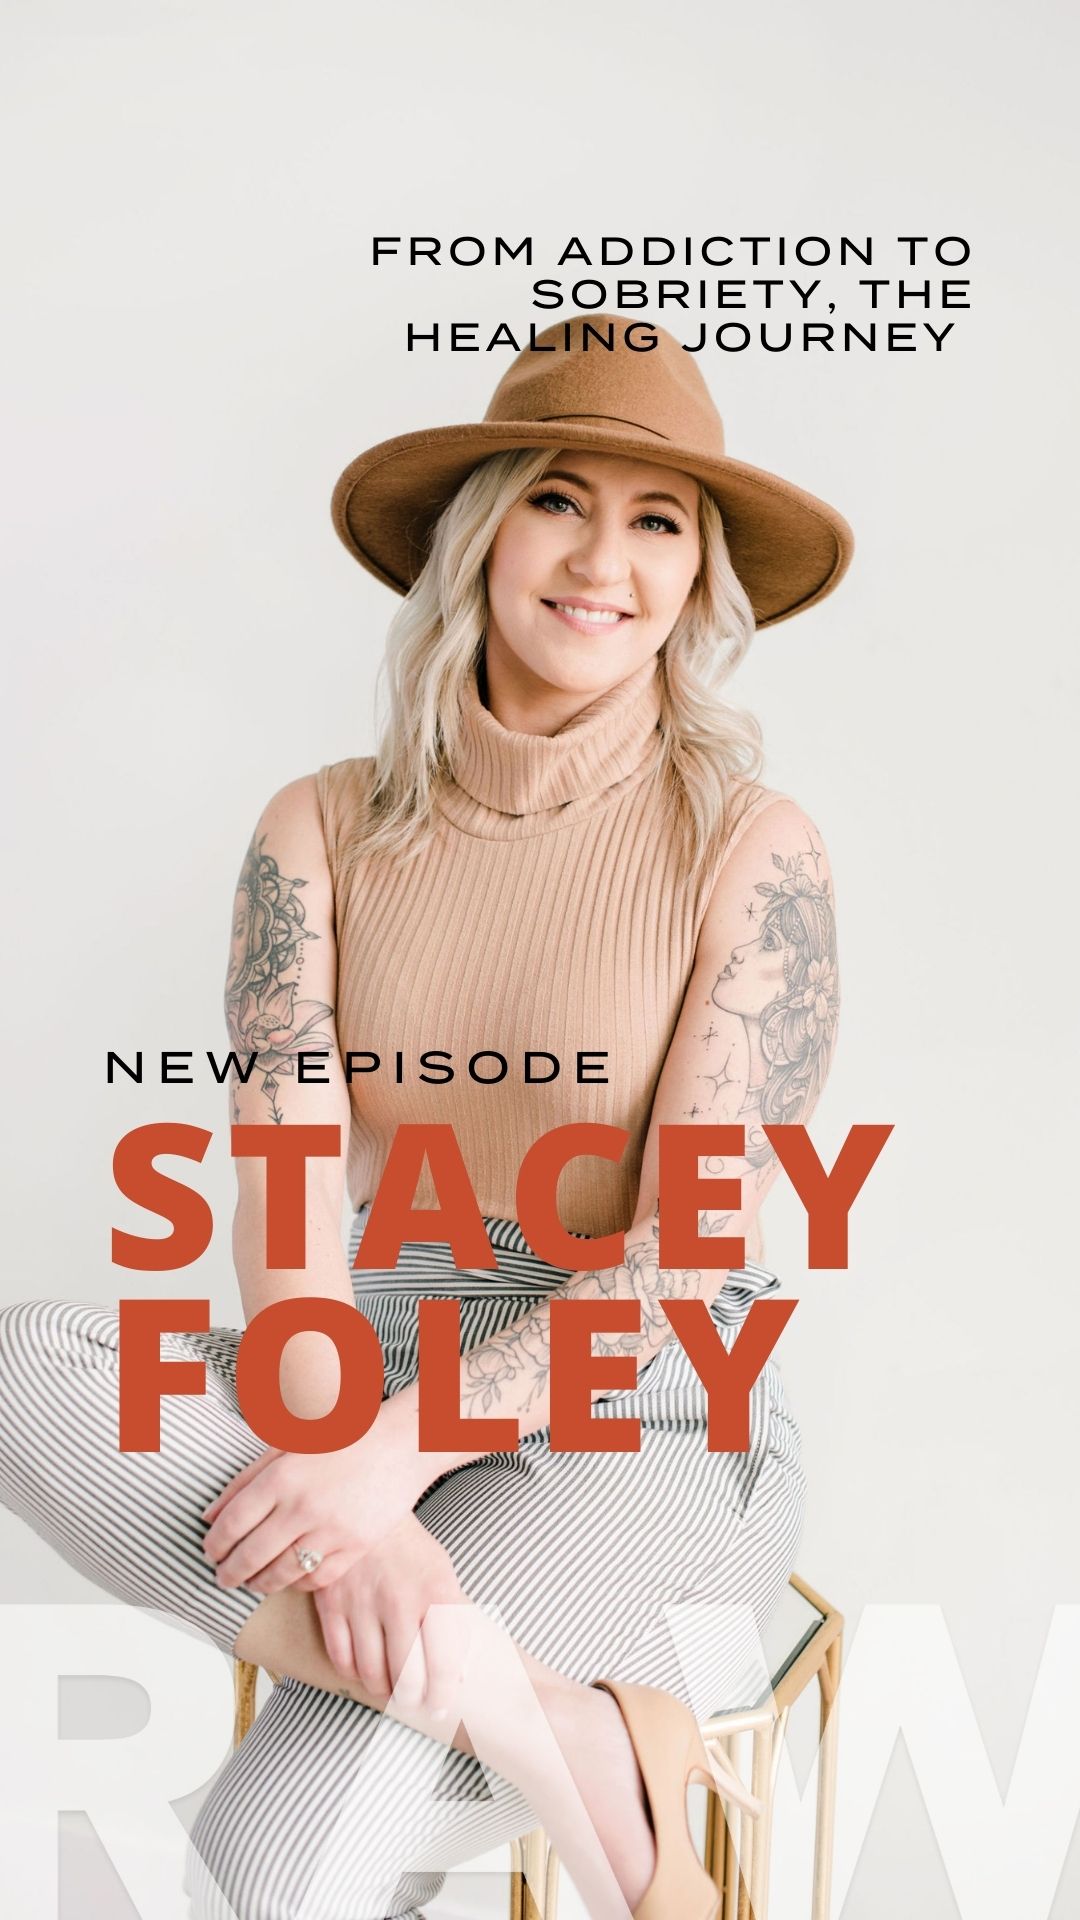 Stacy Foley has been inspiring women for years with her message that they are enough, helping them to follow their dreams and achieve success. She is here with us today to talk about her journey towards healing after an abusive relationship that lead to years of addiction.